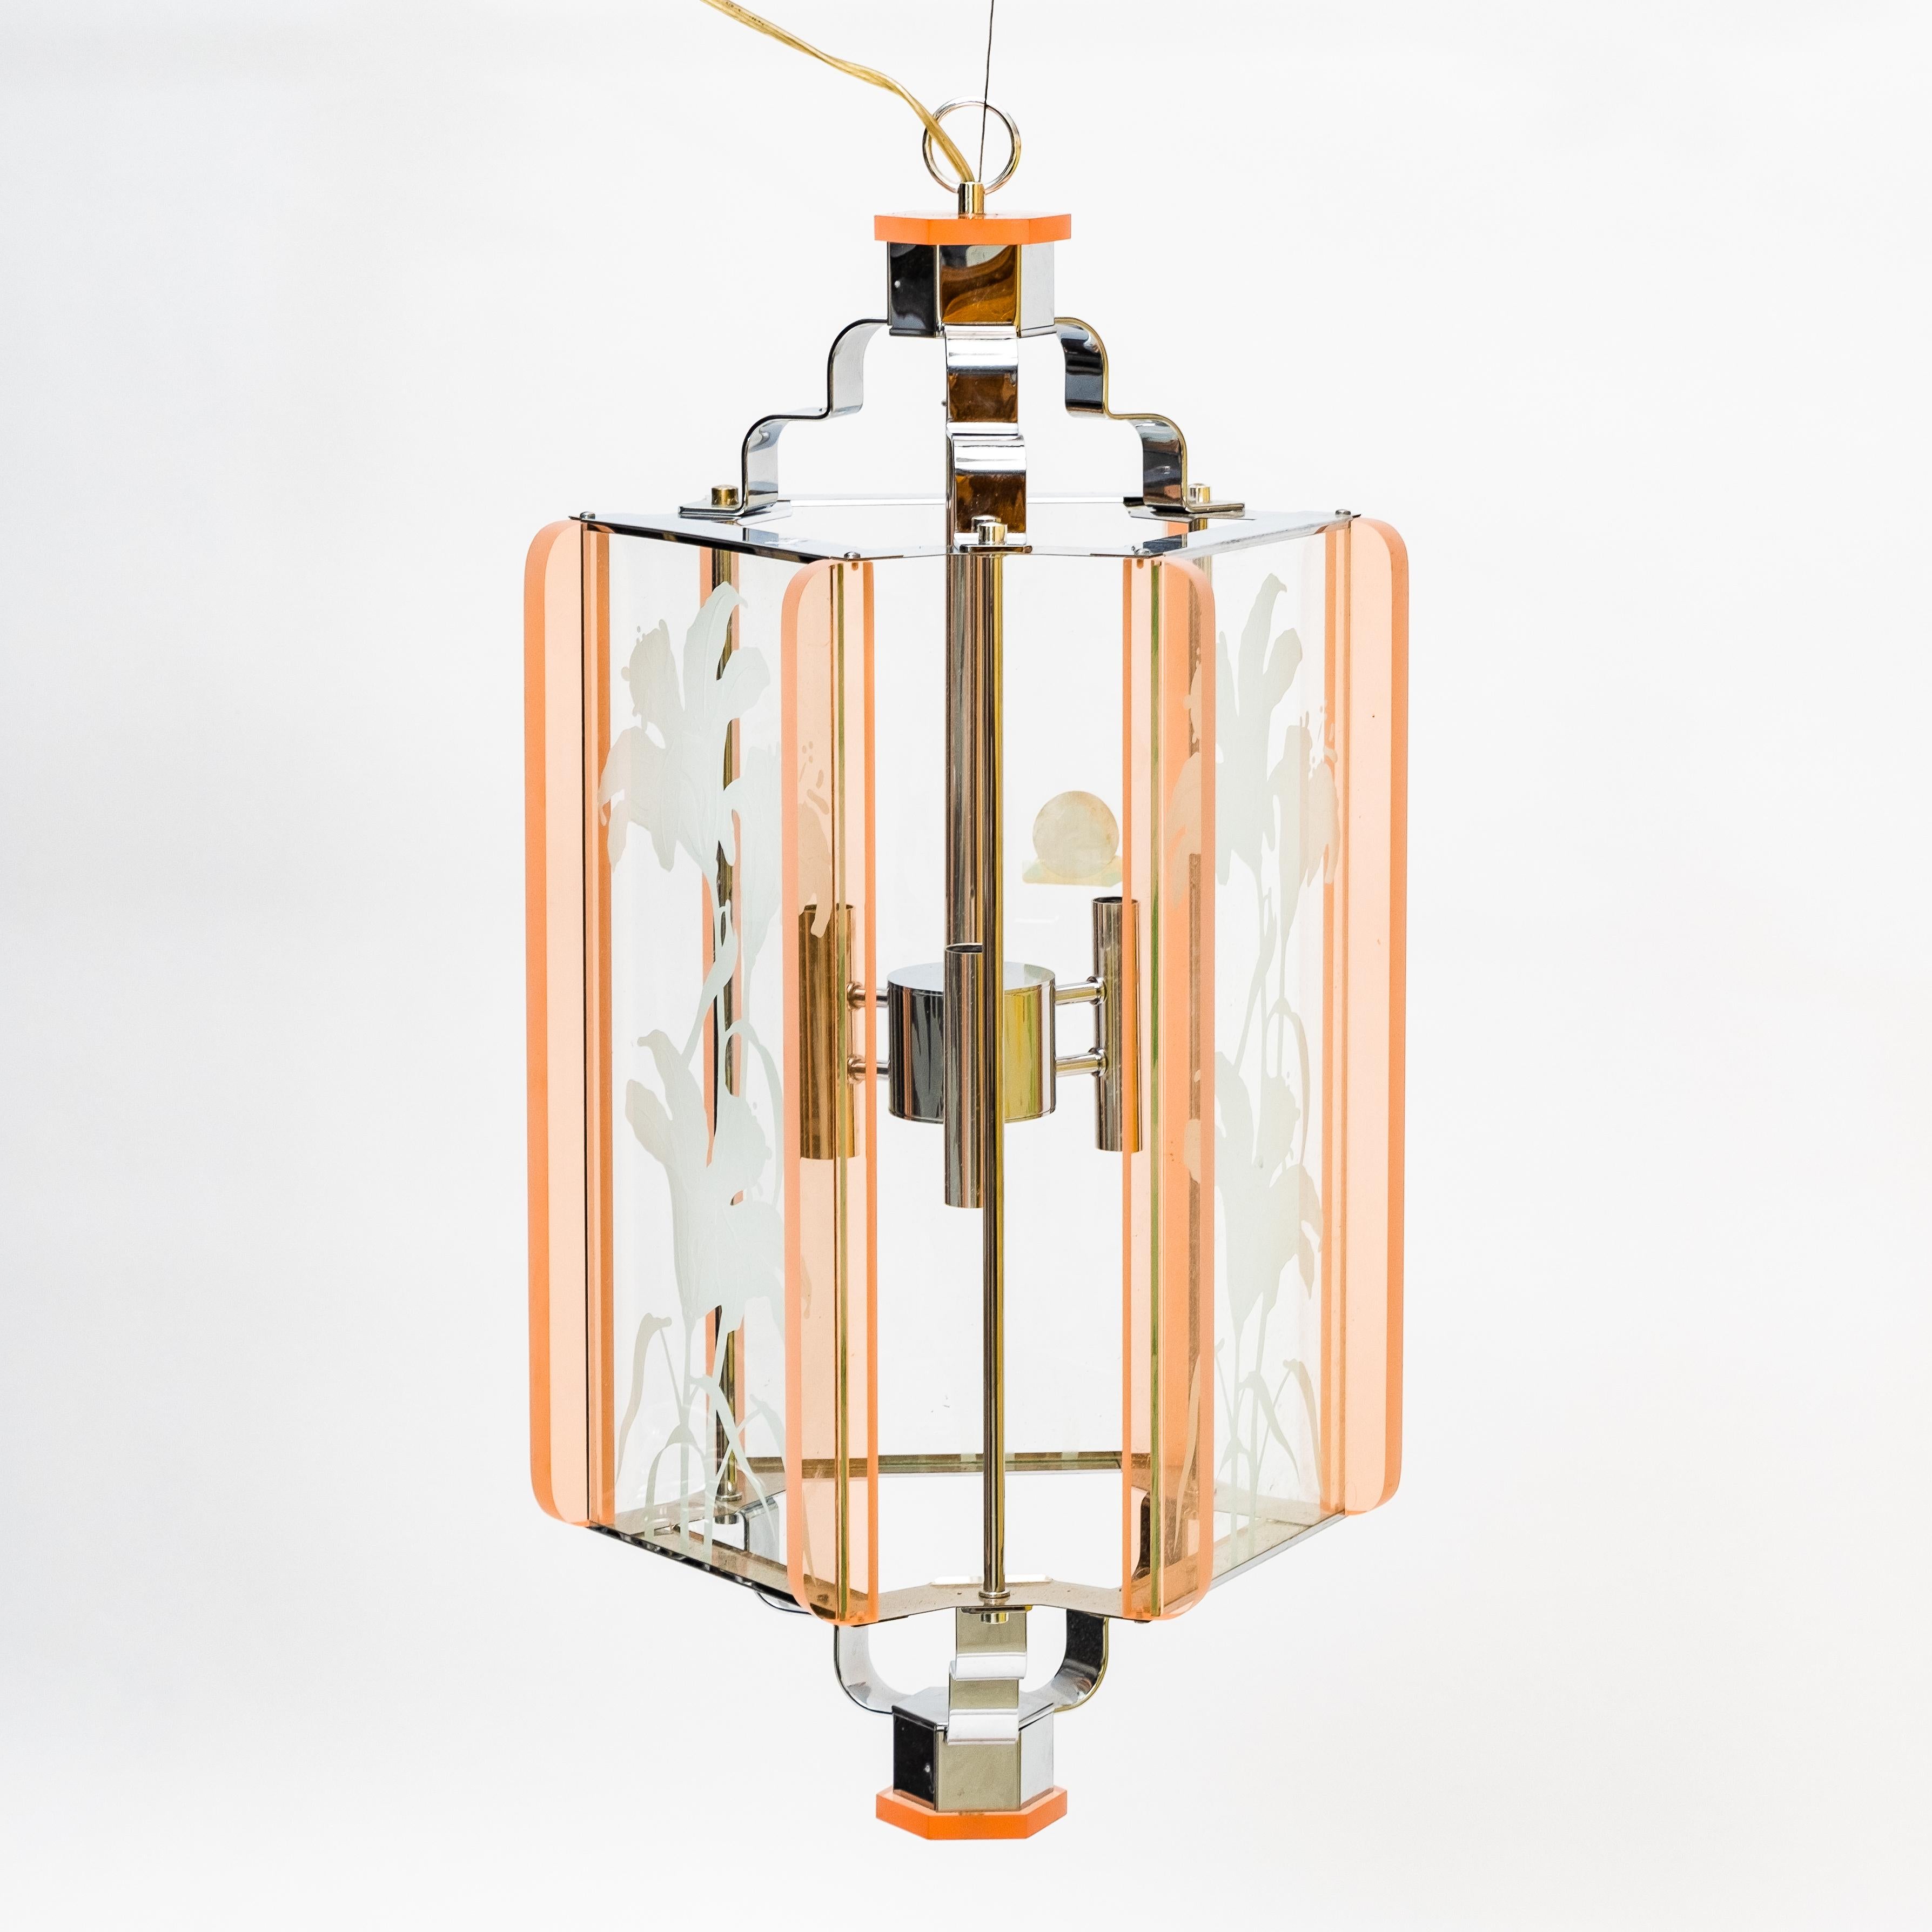 Frederick Ramond signed chandelier, 20th century modern, designed 1987, hexagonal lantern with three glass panels decorated with frosted glass floral sprays, framed by pink glass and set in chrome frame, three candelabra sockets, fixture, stamped